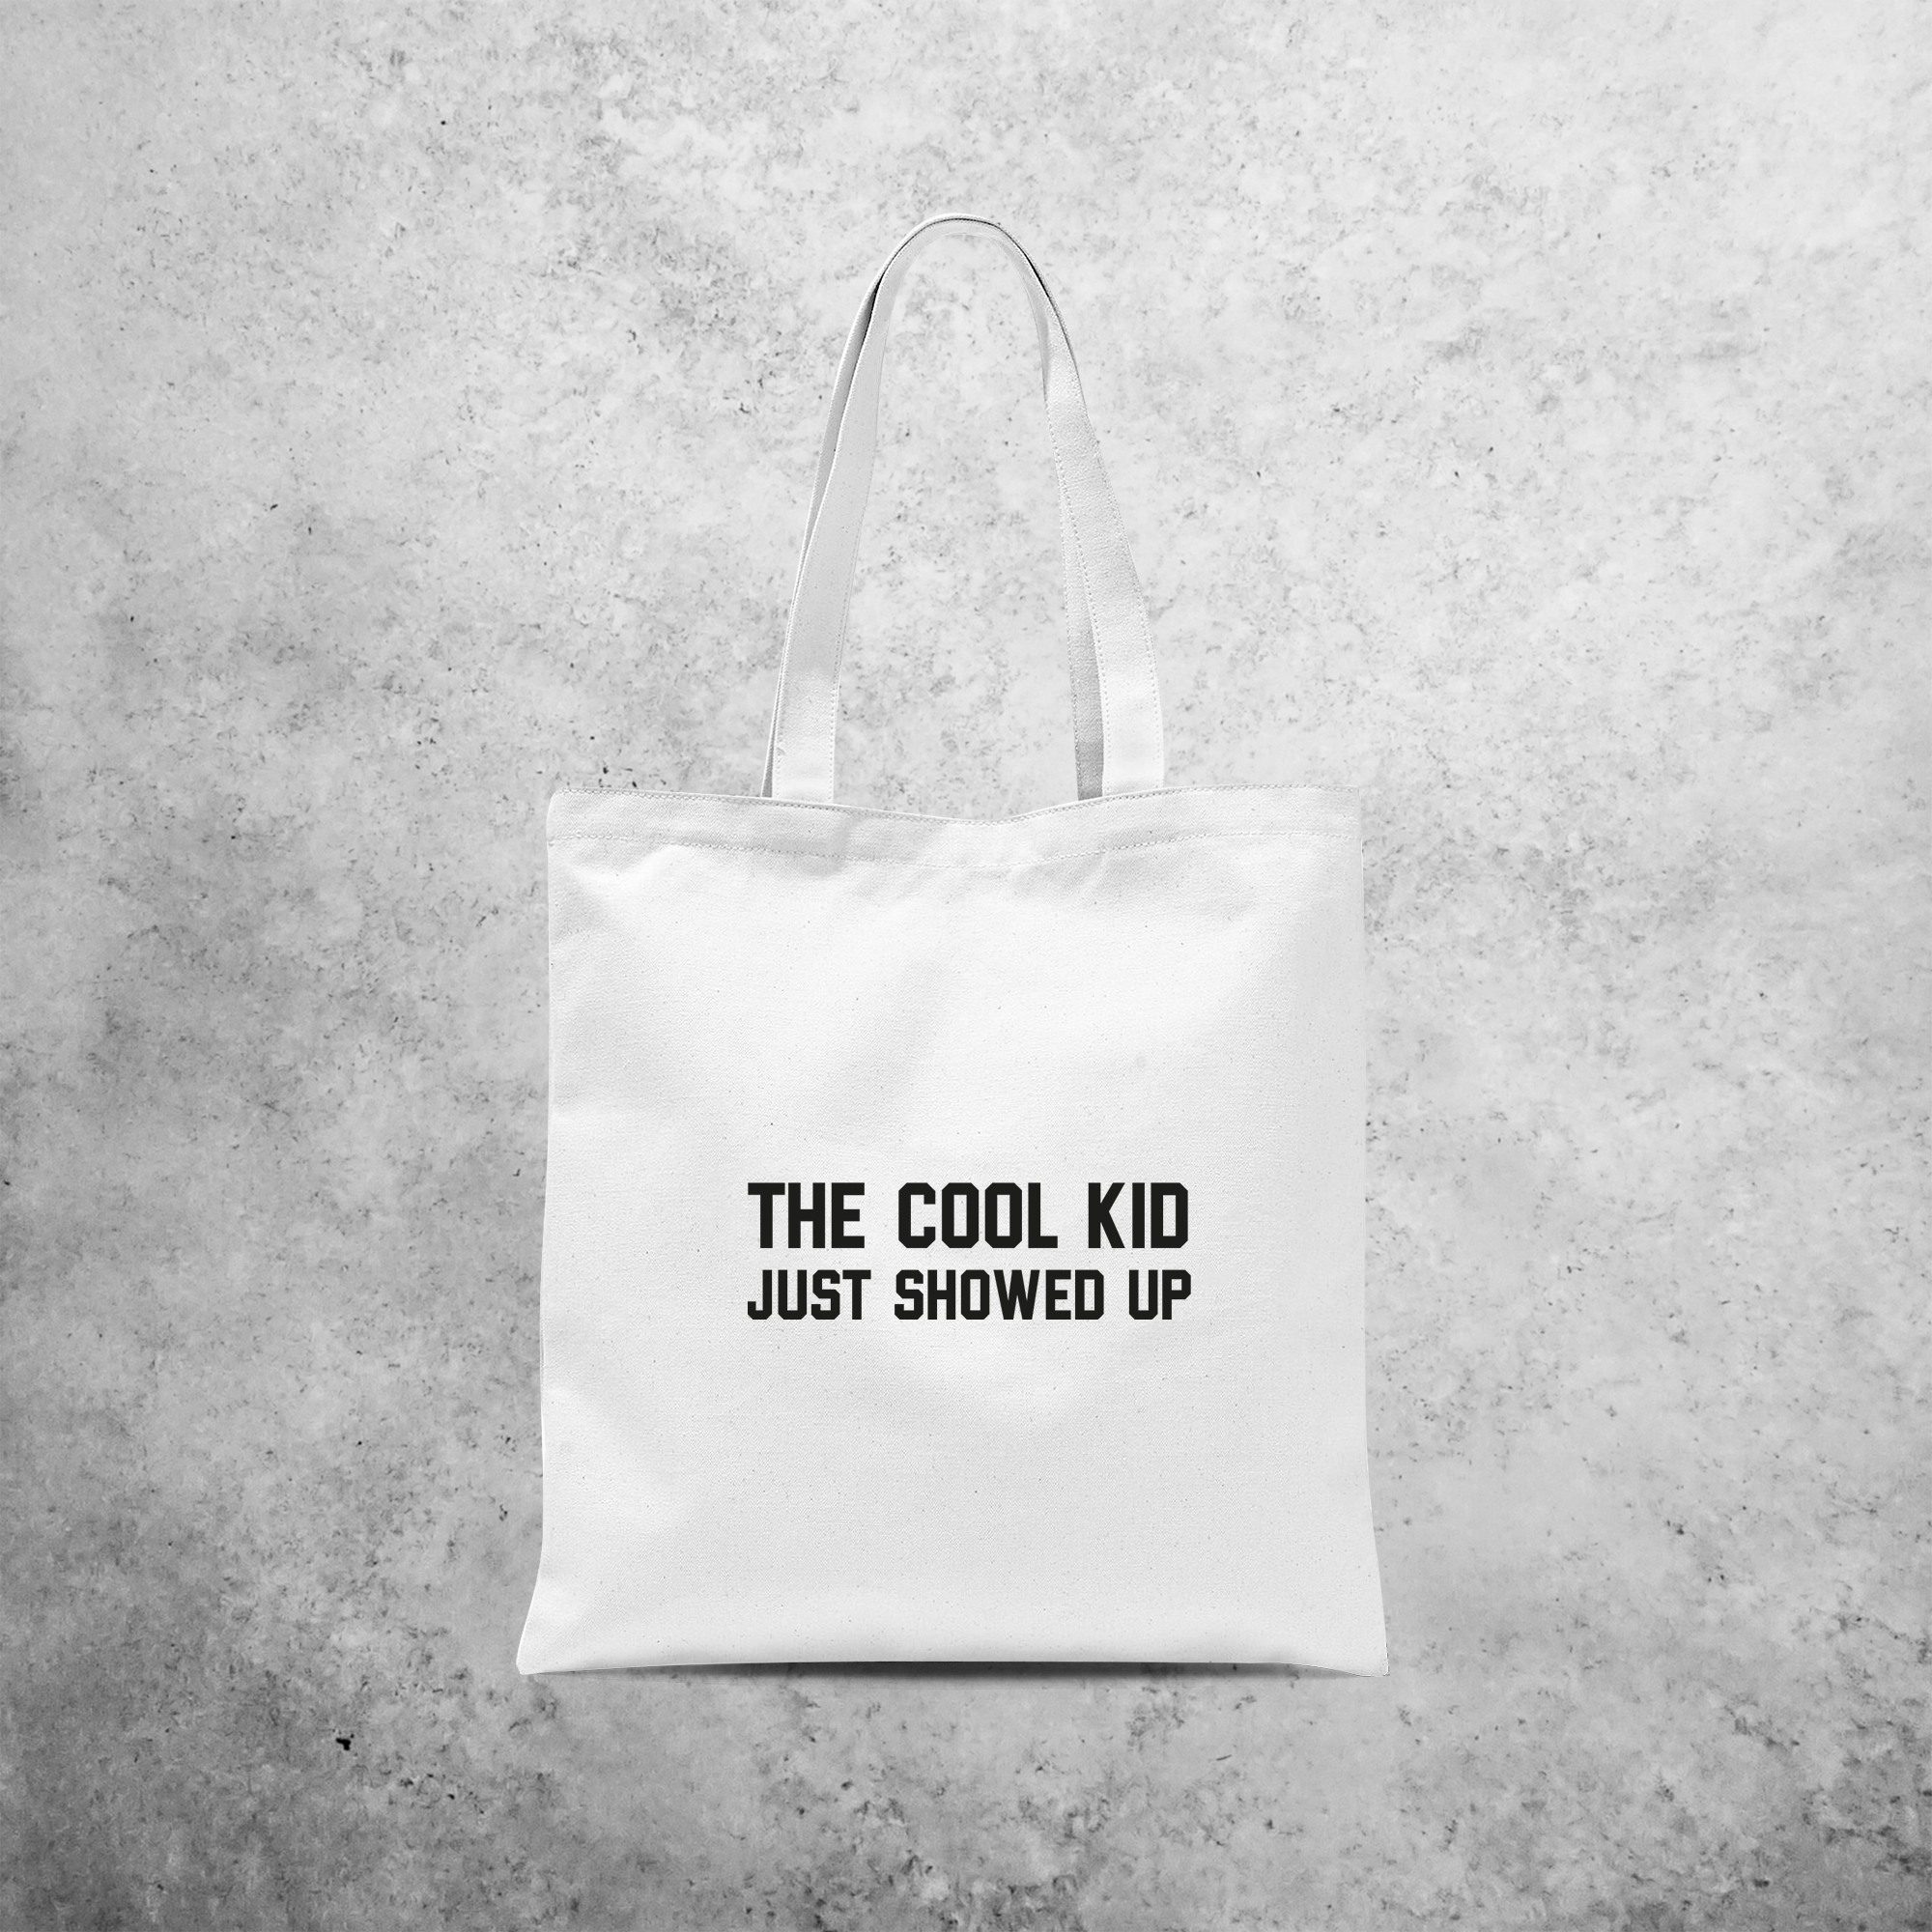 'The cool kid just showed up' tote bag